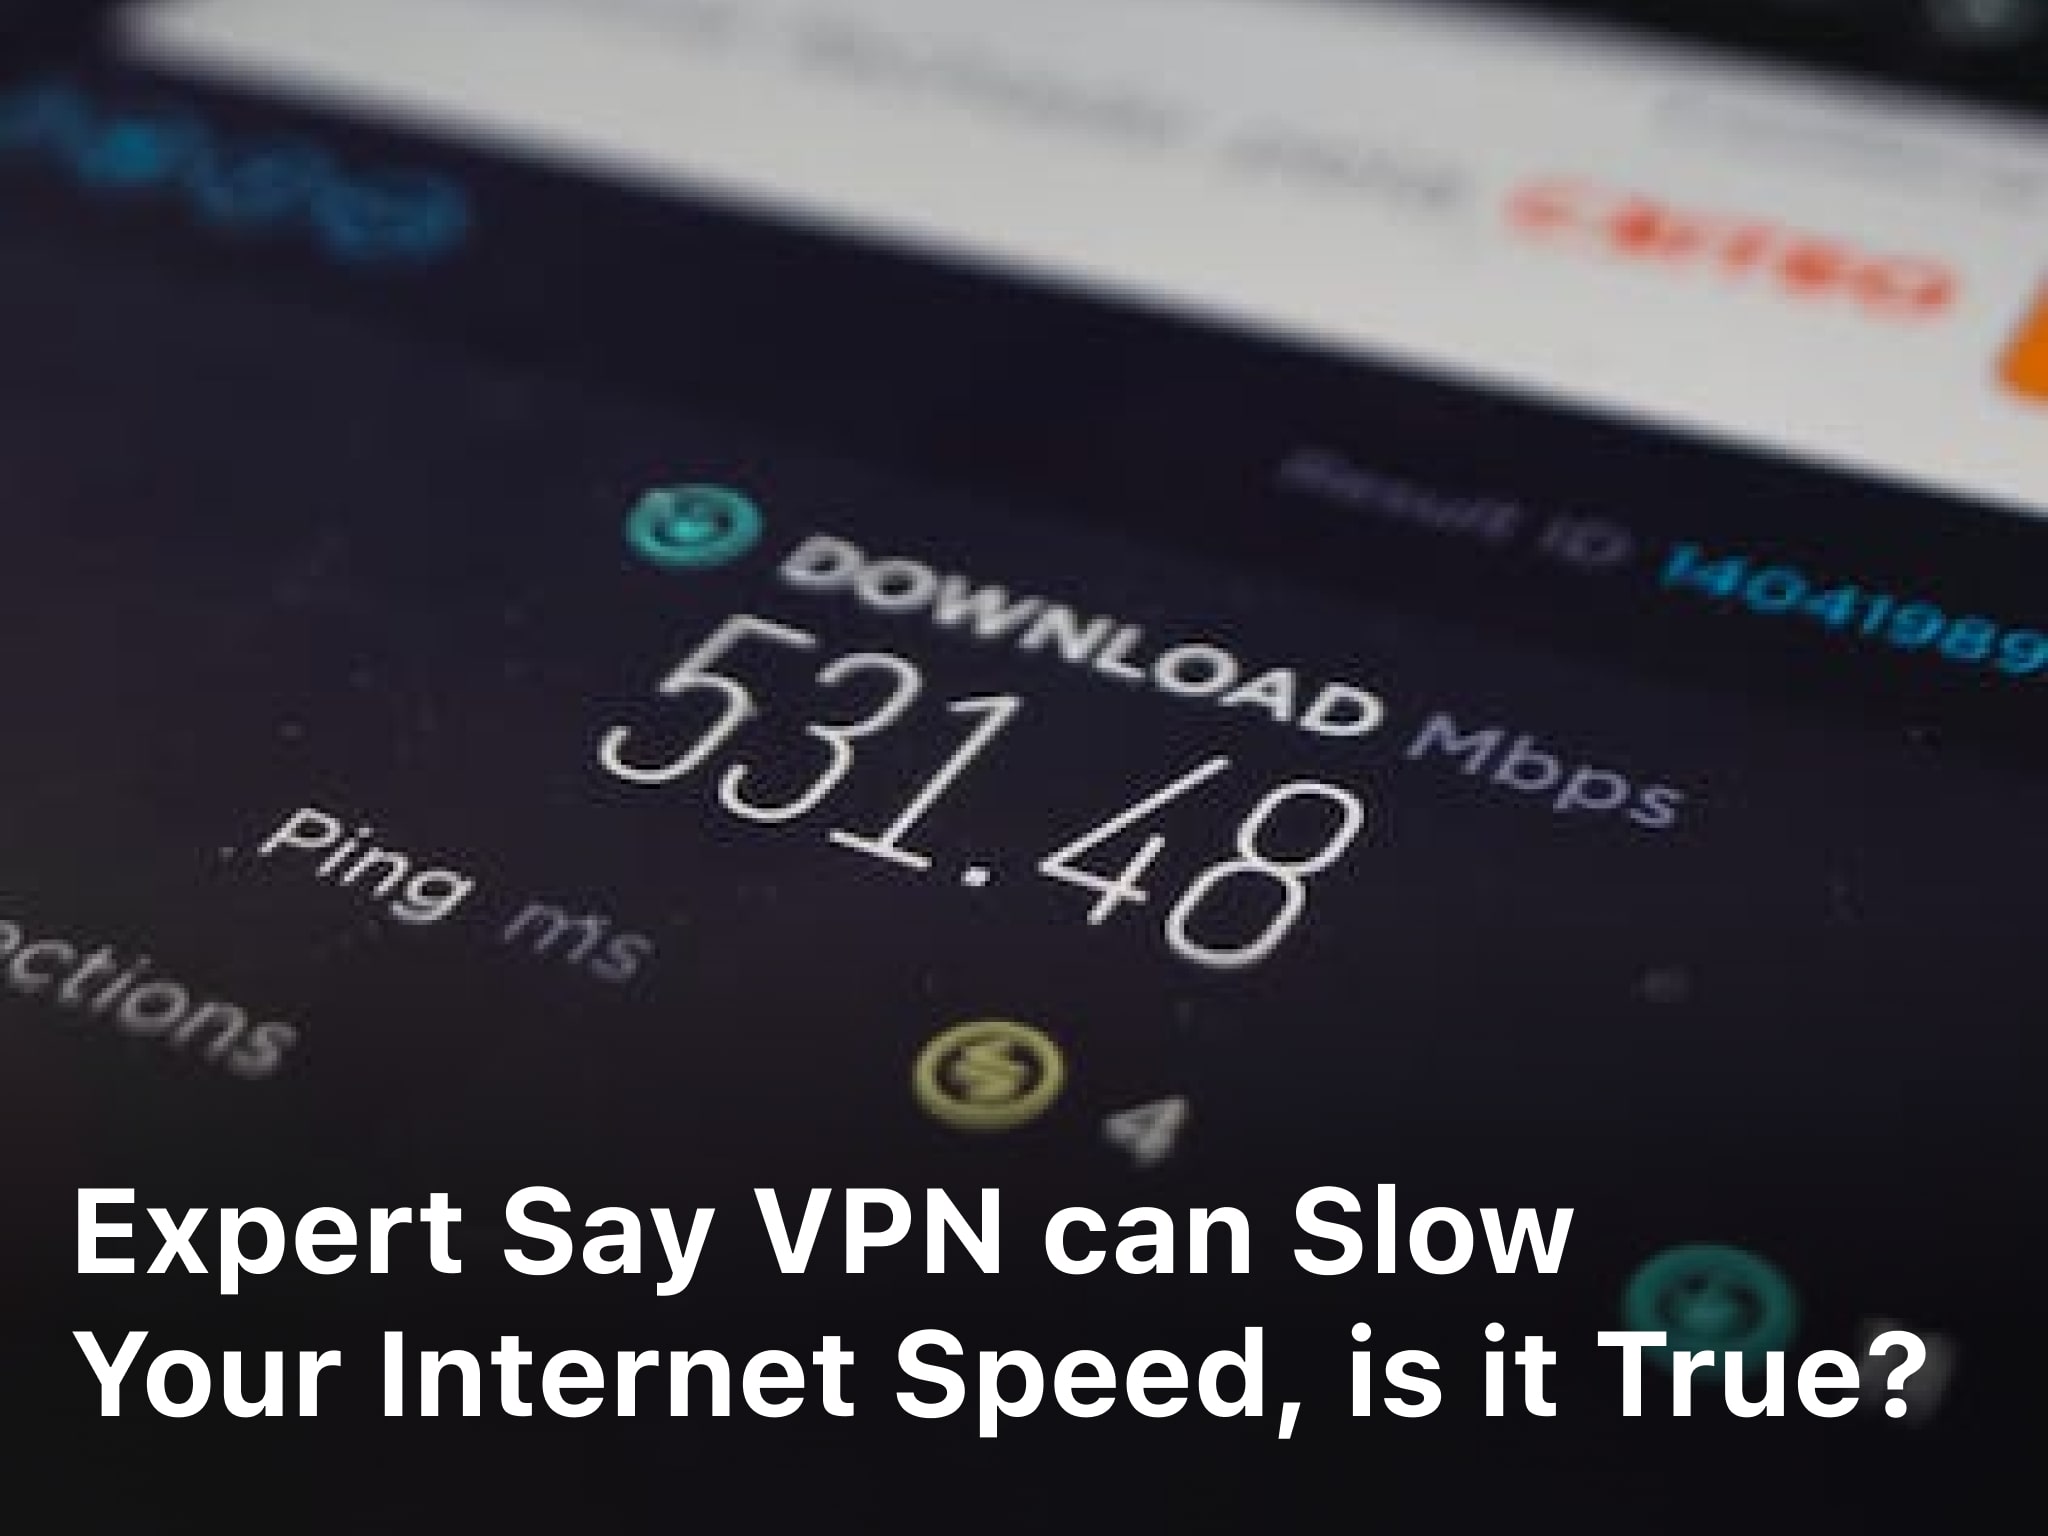 Expert Say VPN can Slow Your Internet Speed, is it True